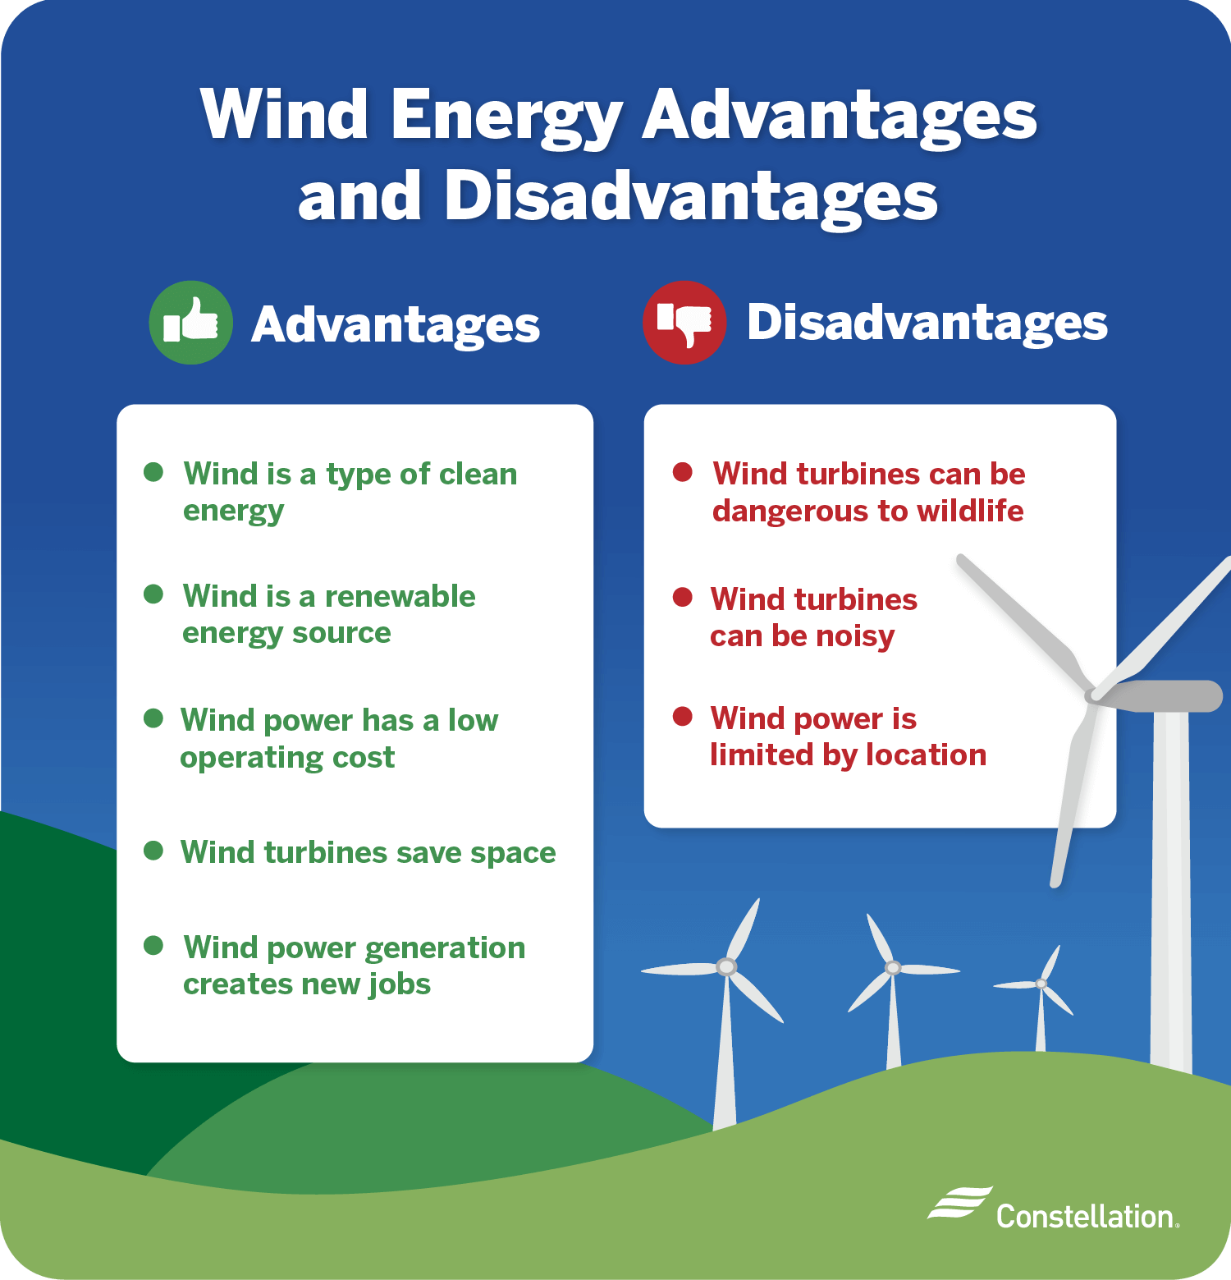 Wind energy advantages and disadvantages